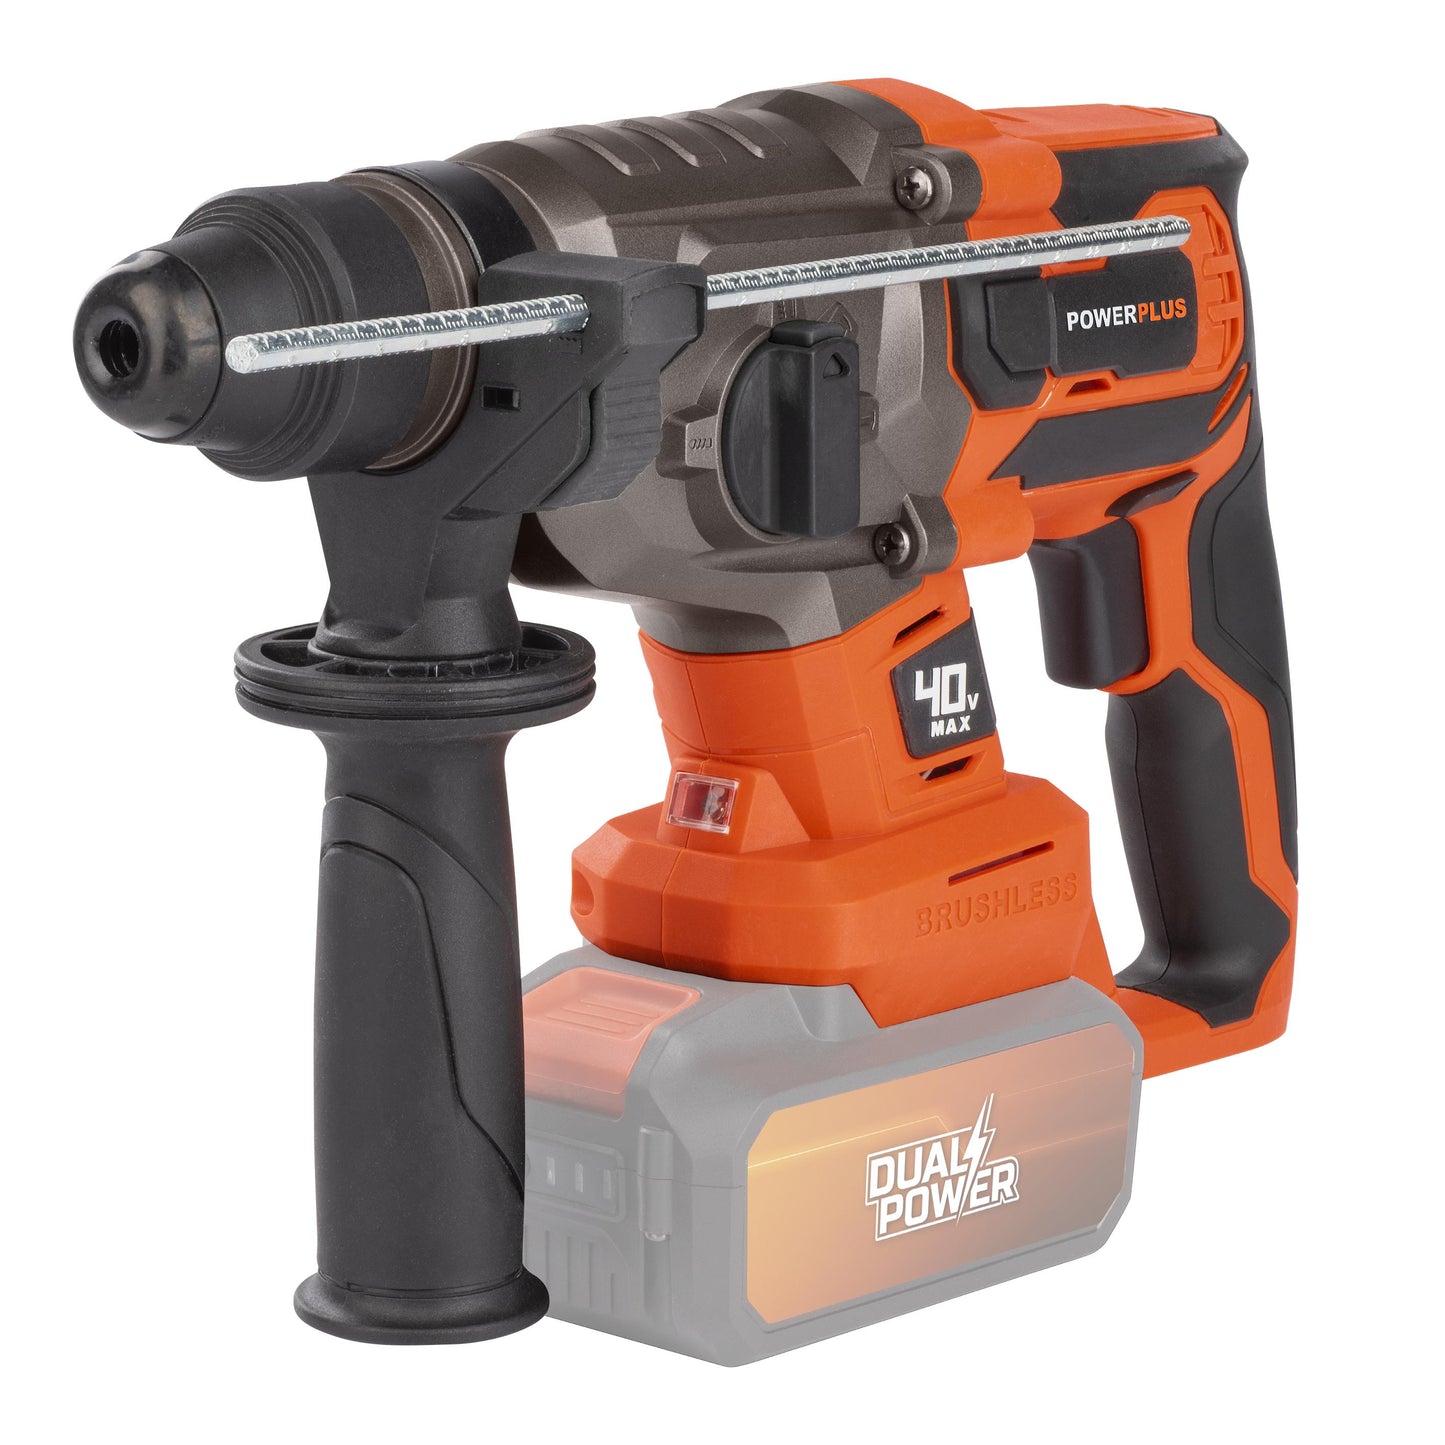 Dual Power - 40V Cordless Hammer Drill Brushless - 4 Functions(unit only)